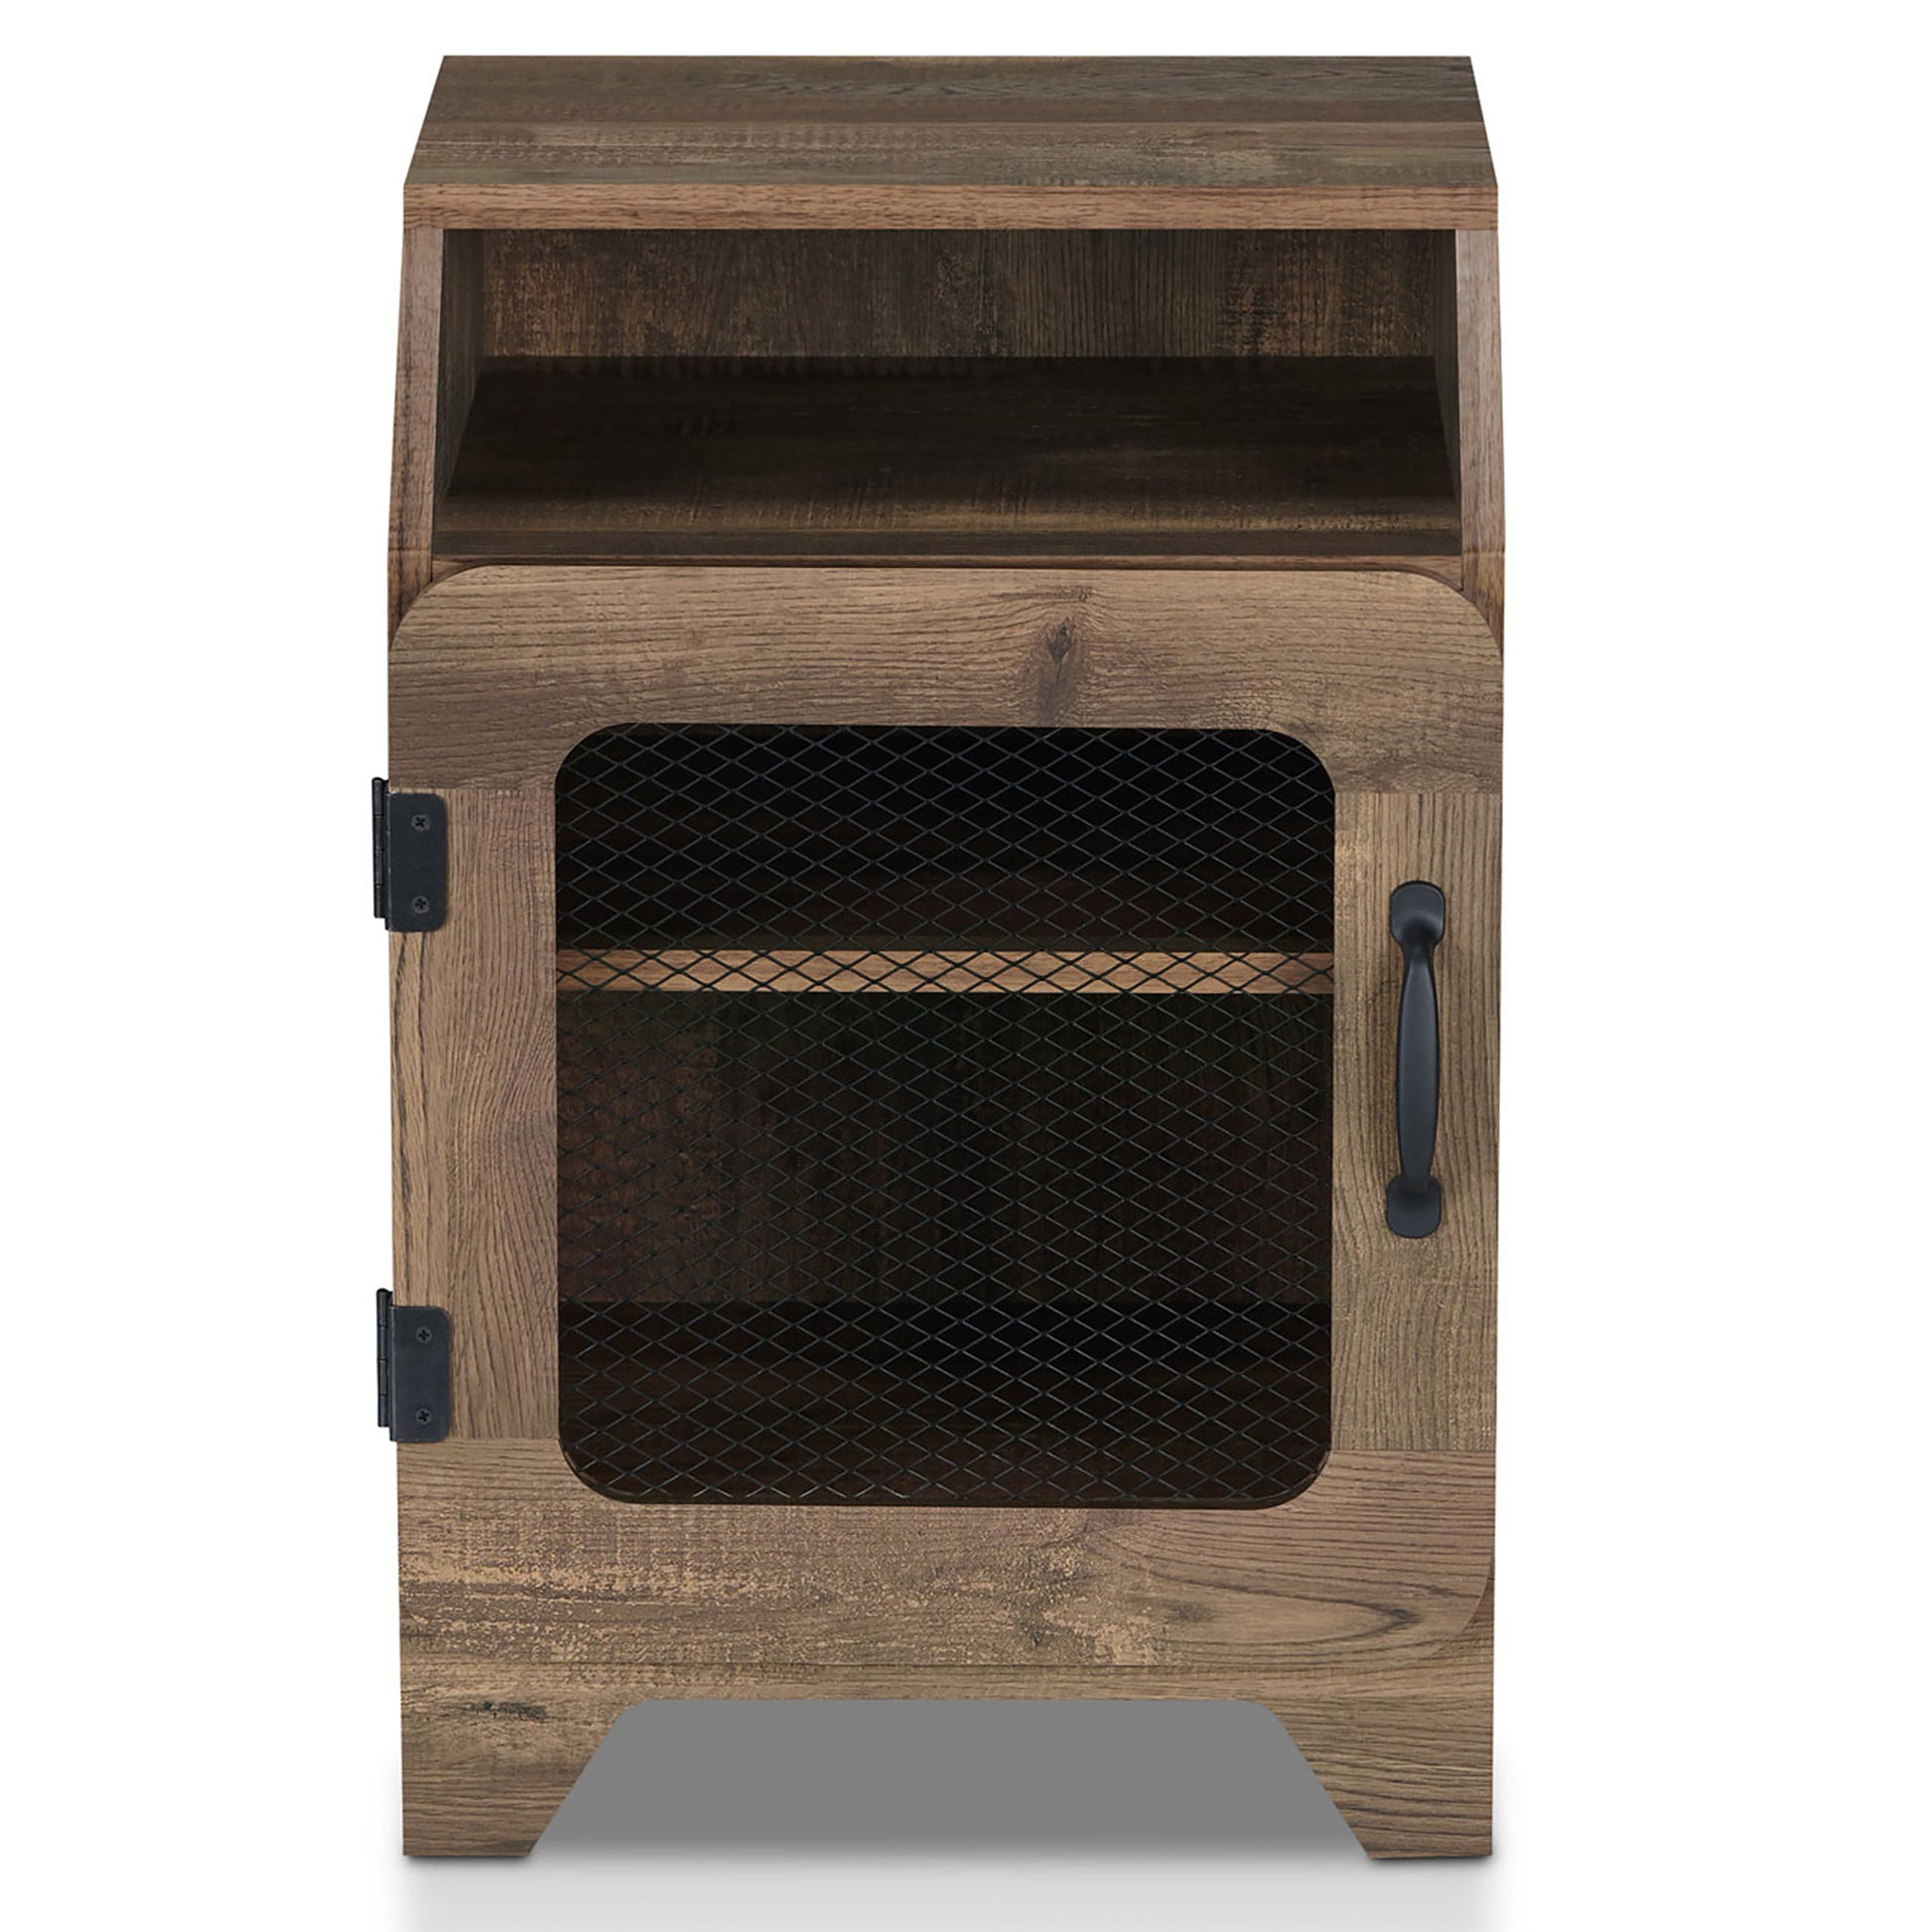 Front-facing rustic reclaimed oak three-shelf end table with a metal mesh door on a white background